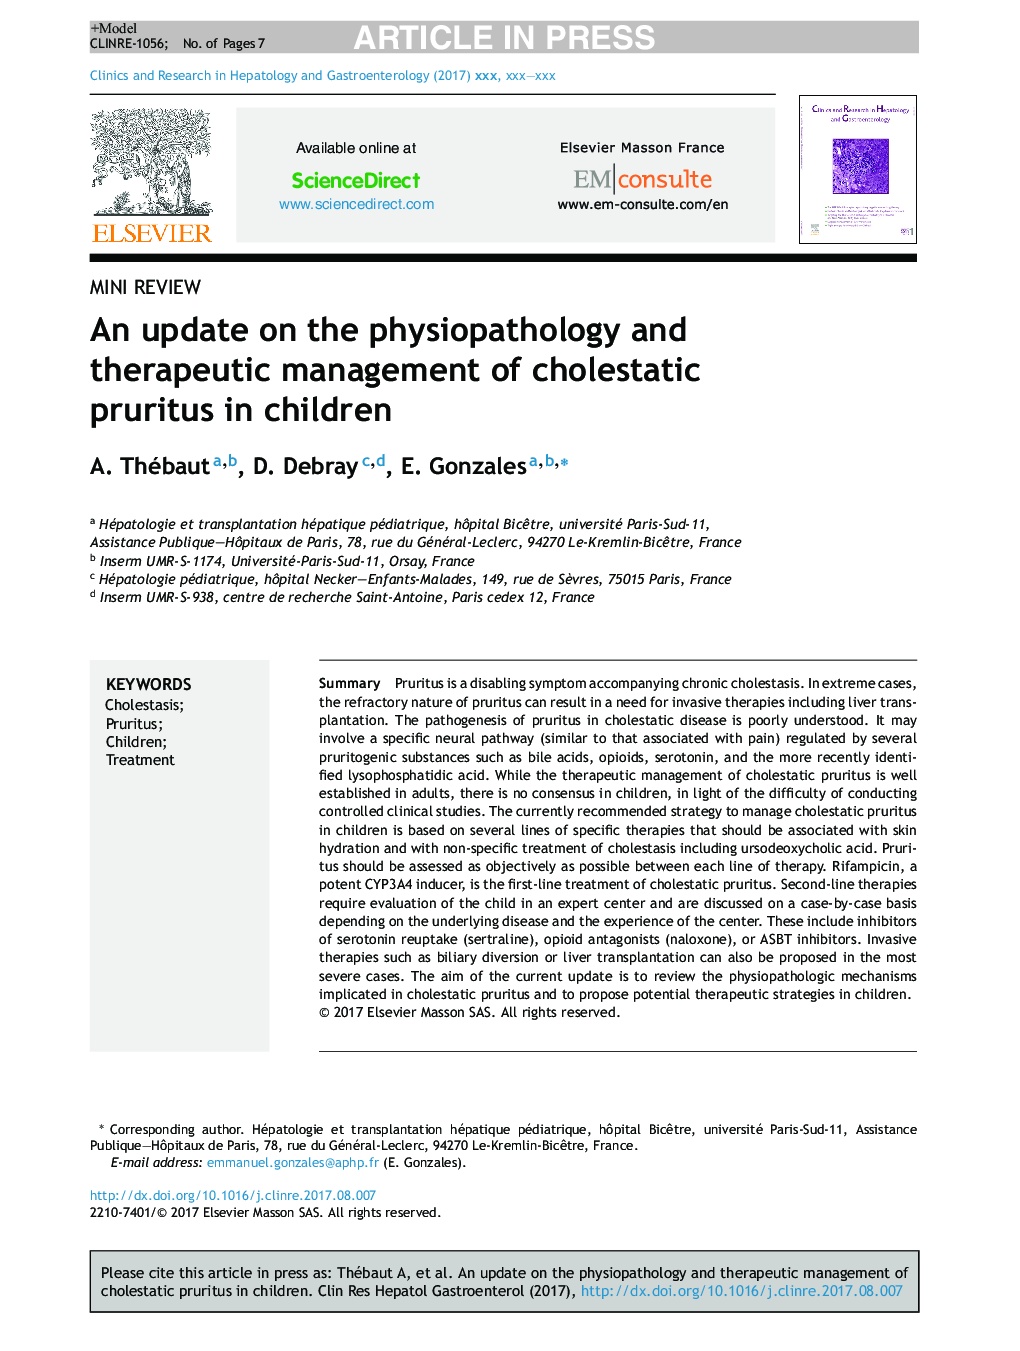 An update on the physiopathology and therapeutic management of cholestatic pruritus in children